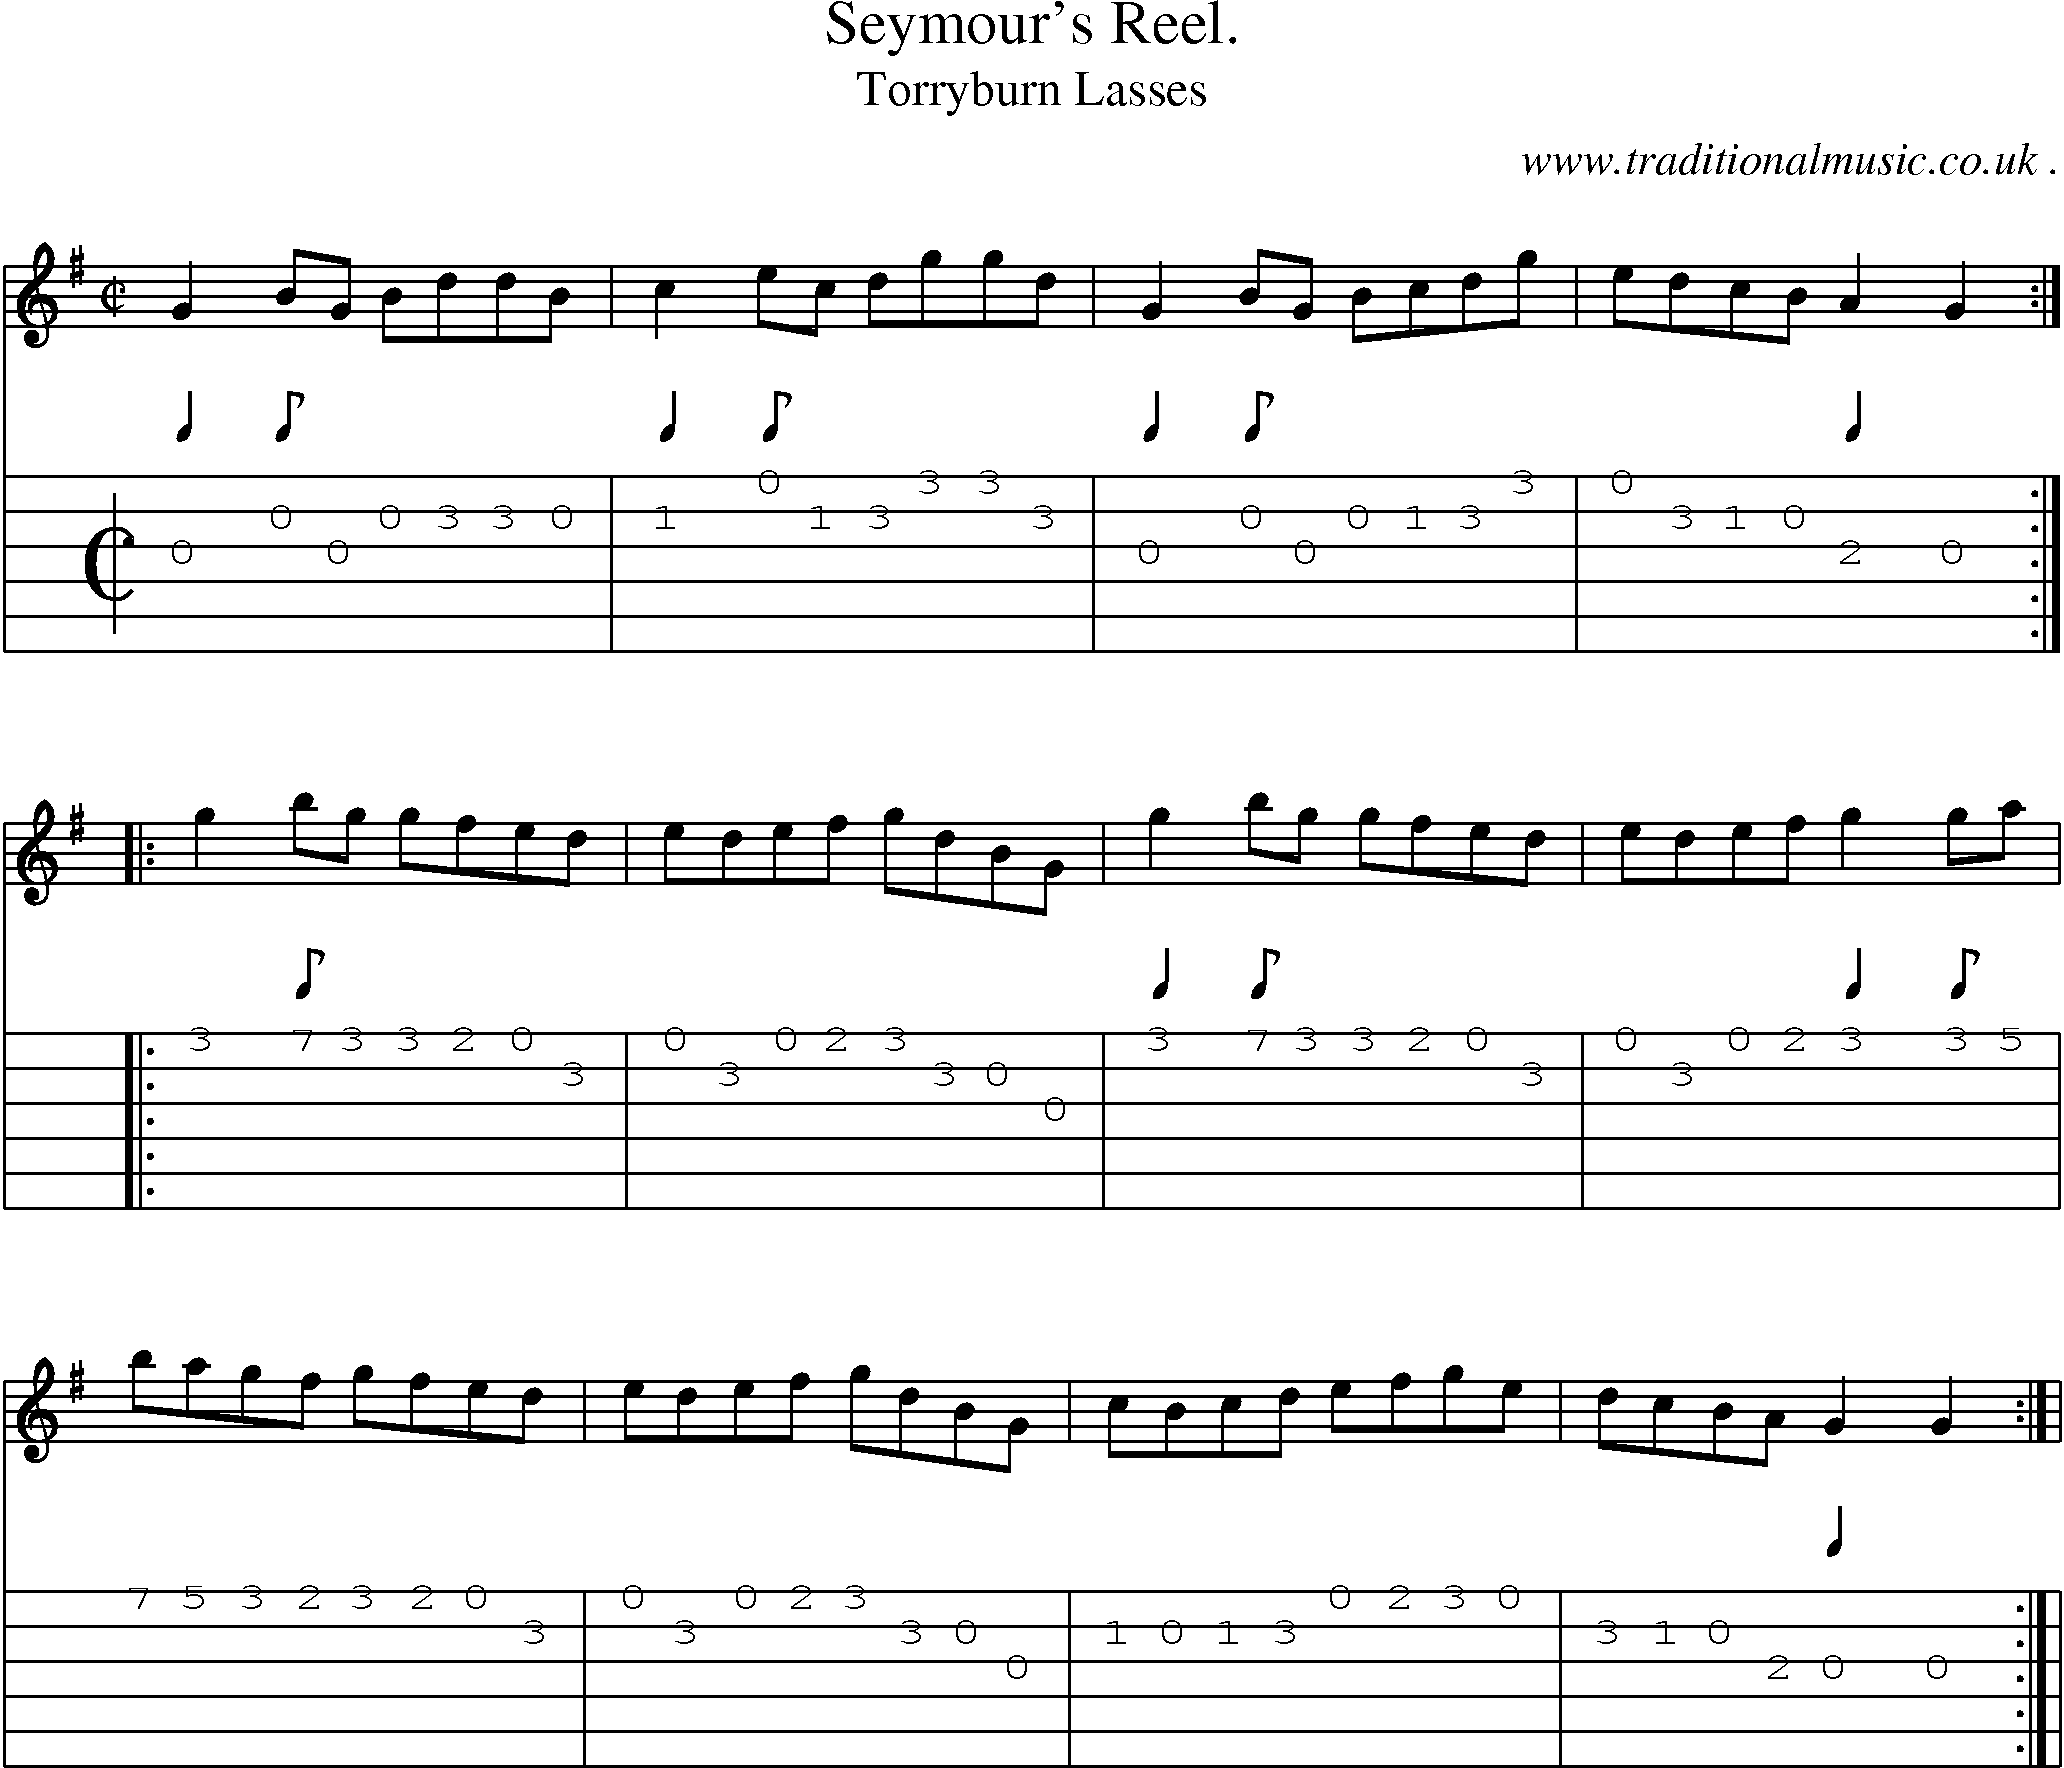 Sheet-Music and Guitar Tabs for Seymours Reel